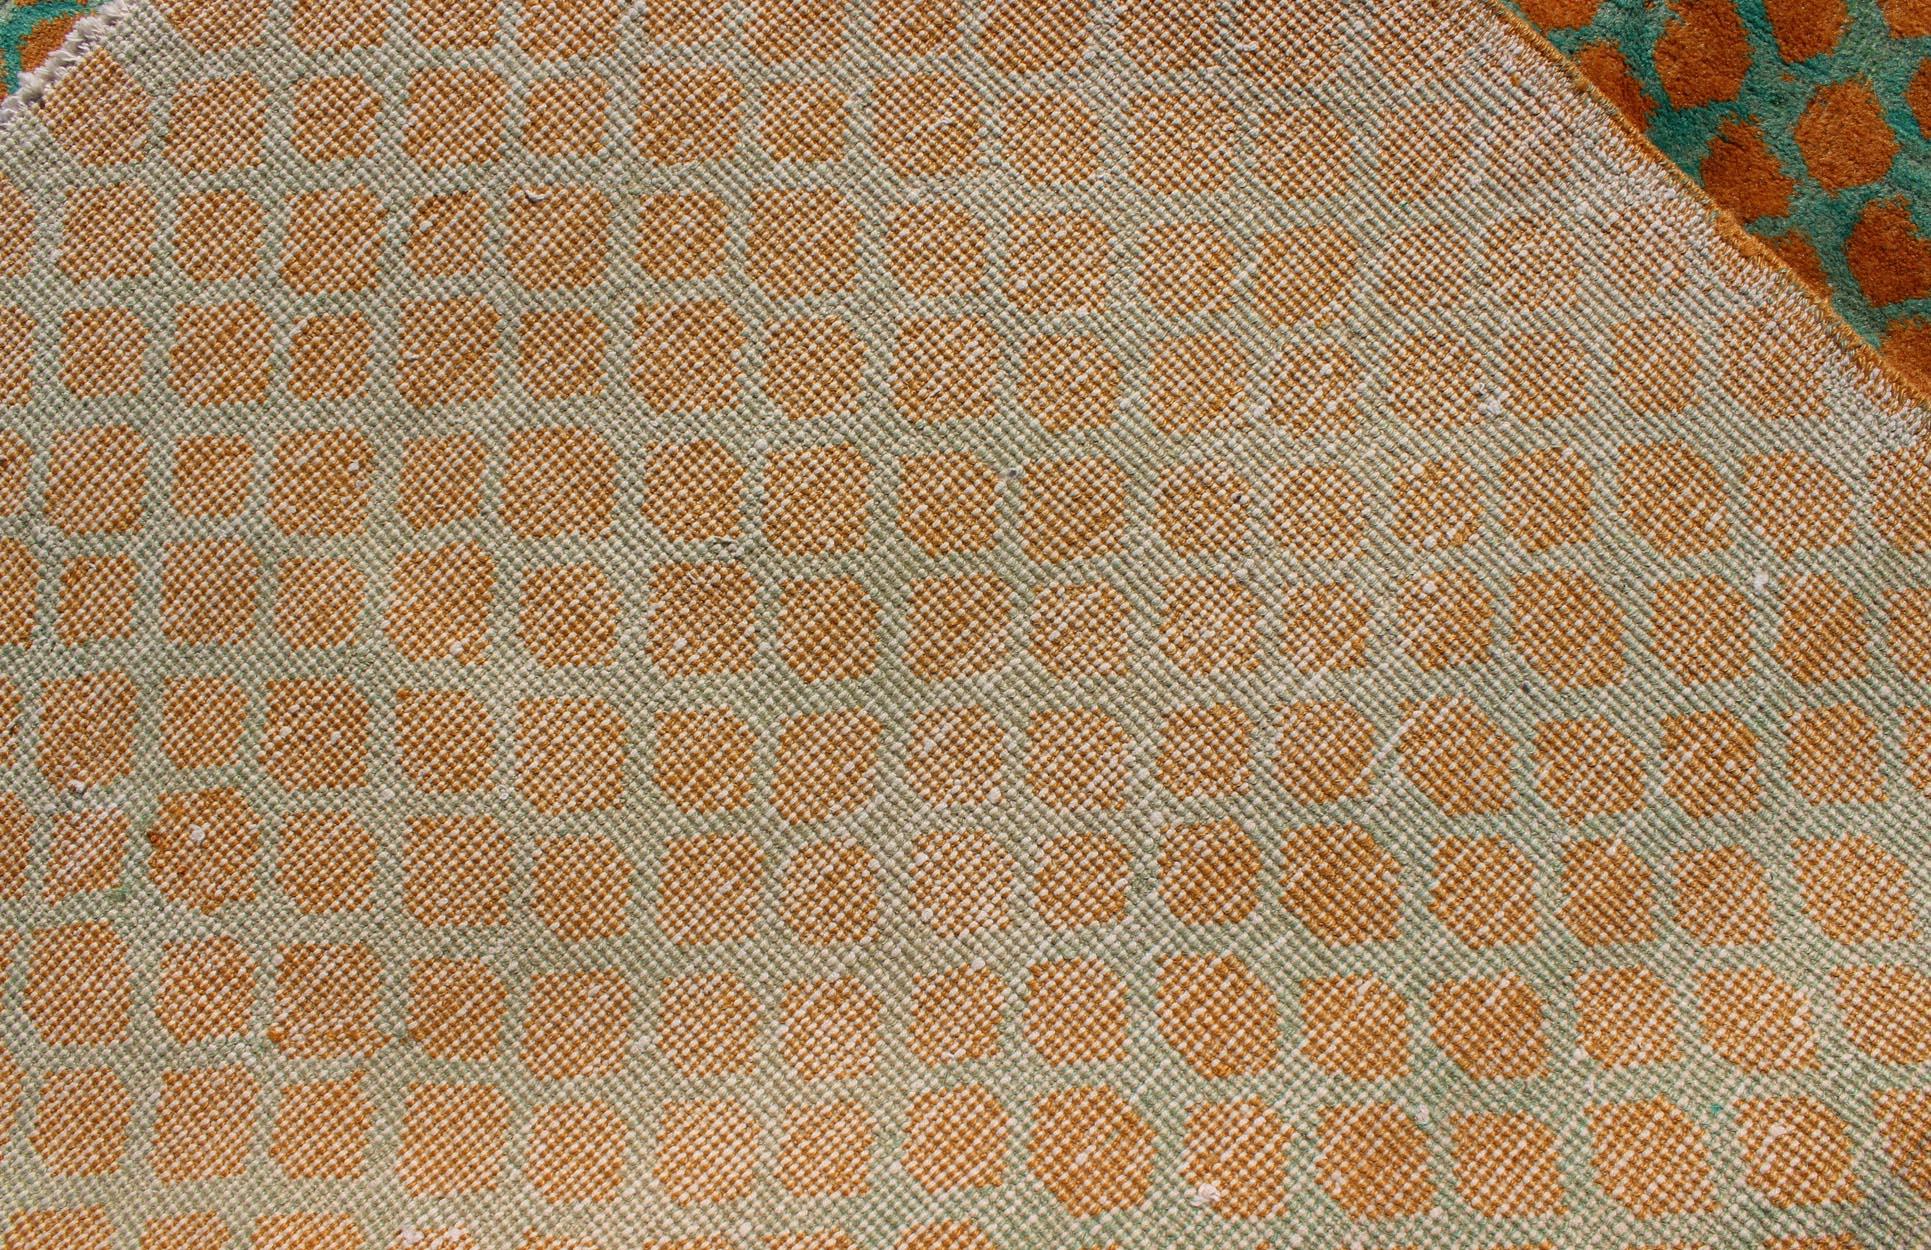 Mid-Century Modern Rug with All-Over Design in Orange and Teal In Excellent Condition For Sale In Atlanta, GA